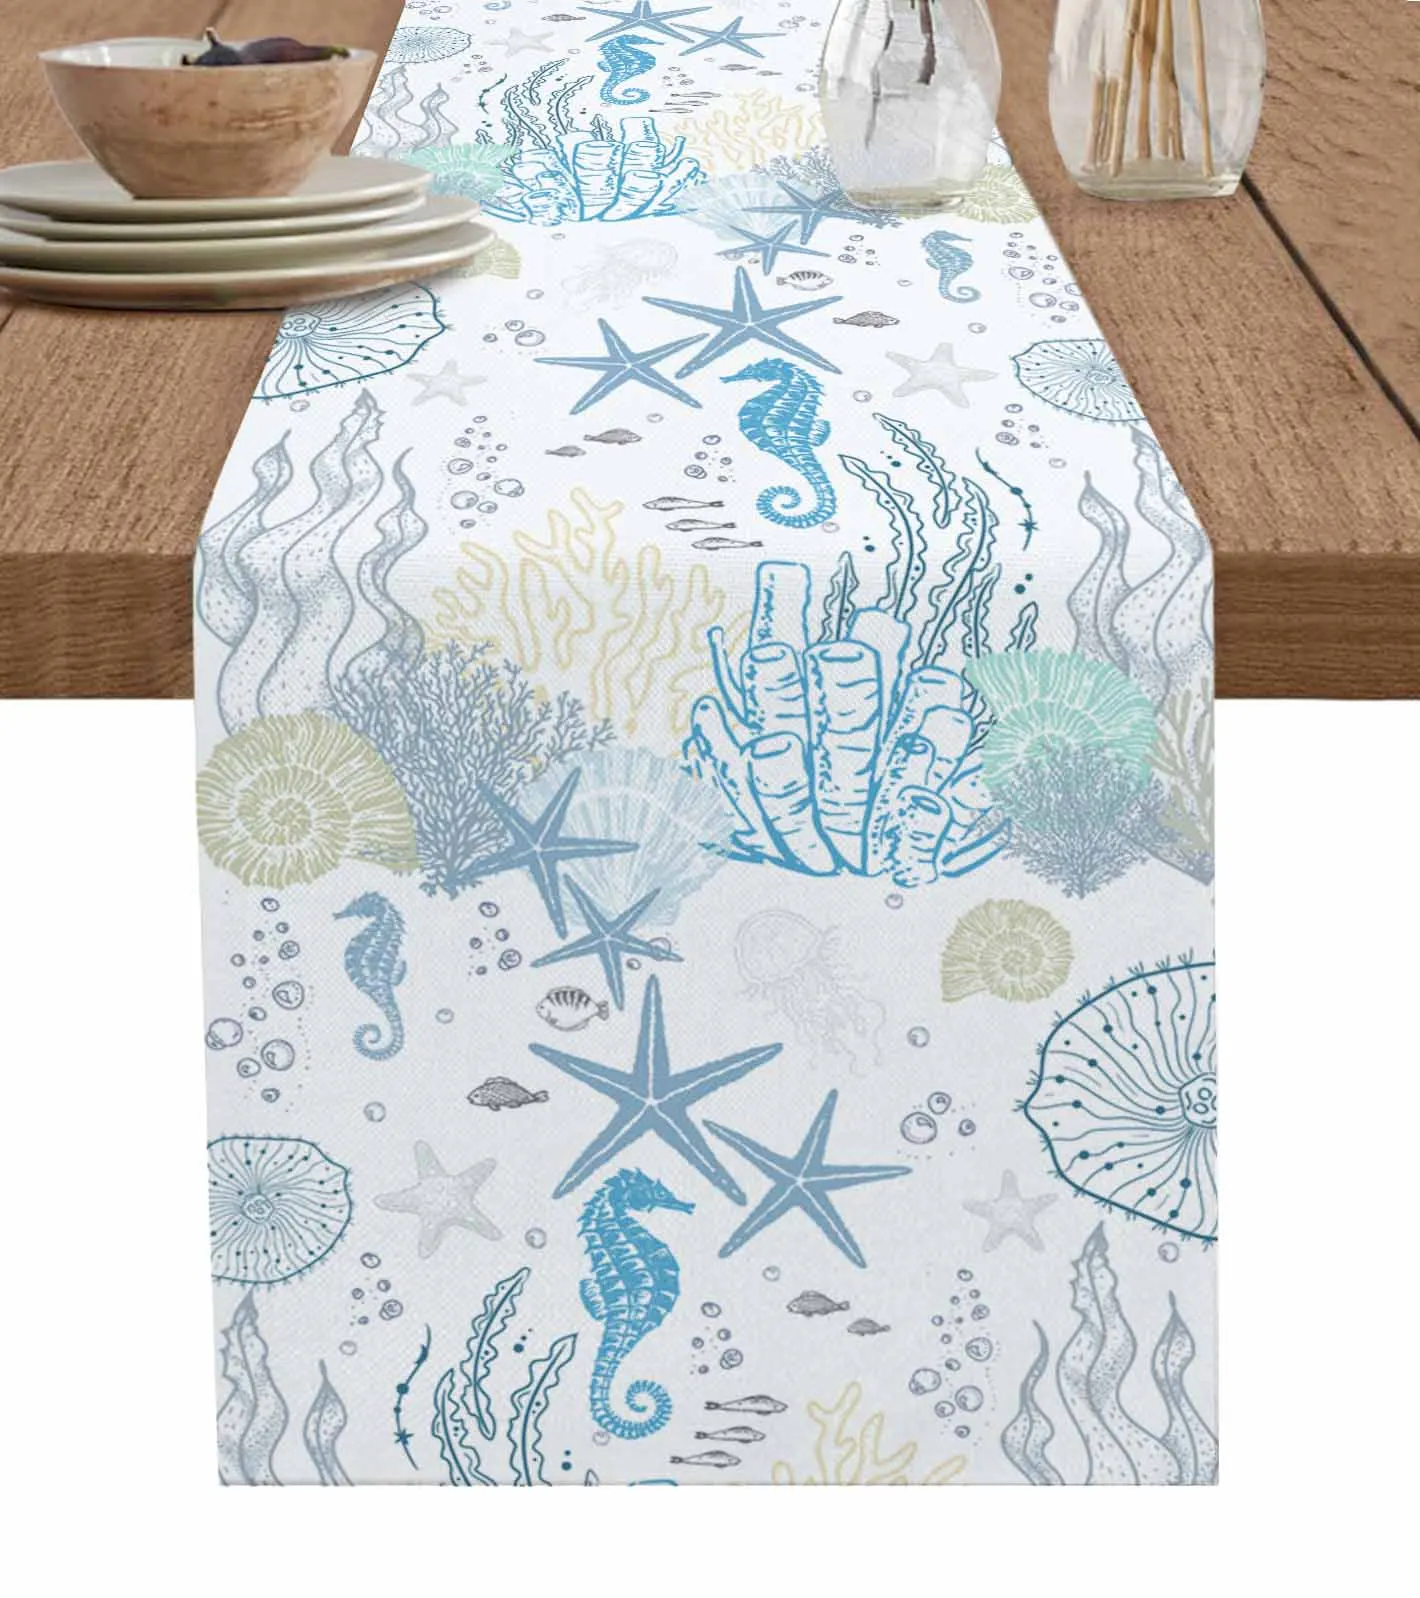 

Ocean Coral Starfish Shell Linen Table Runners Kitchen Table Decoration Accessories Dining Table Runner Wedding Party Supplies